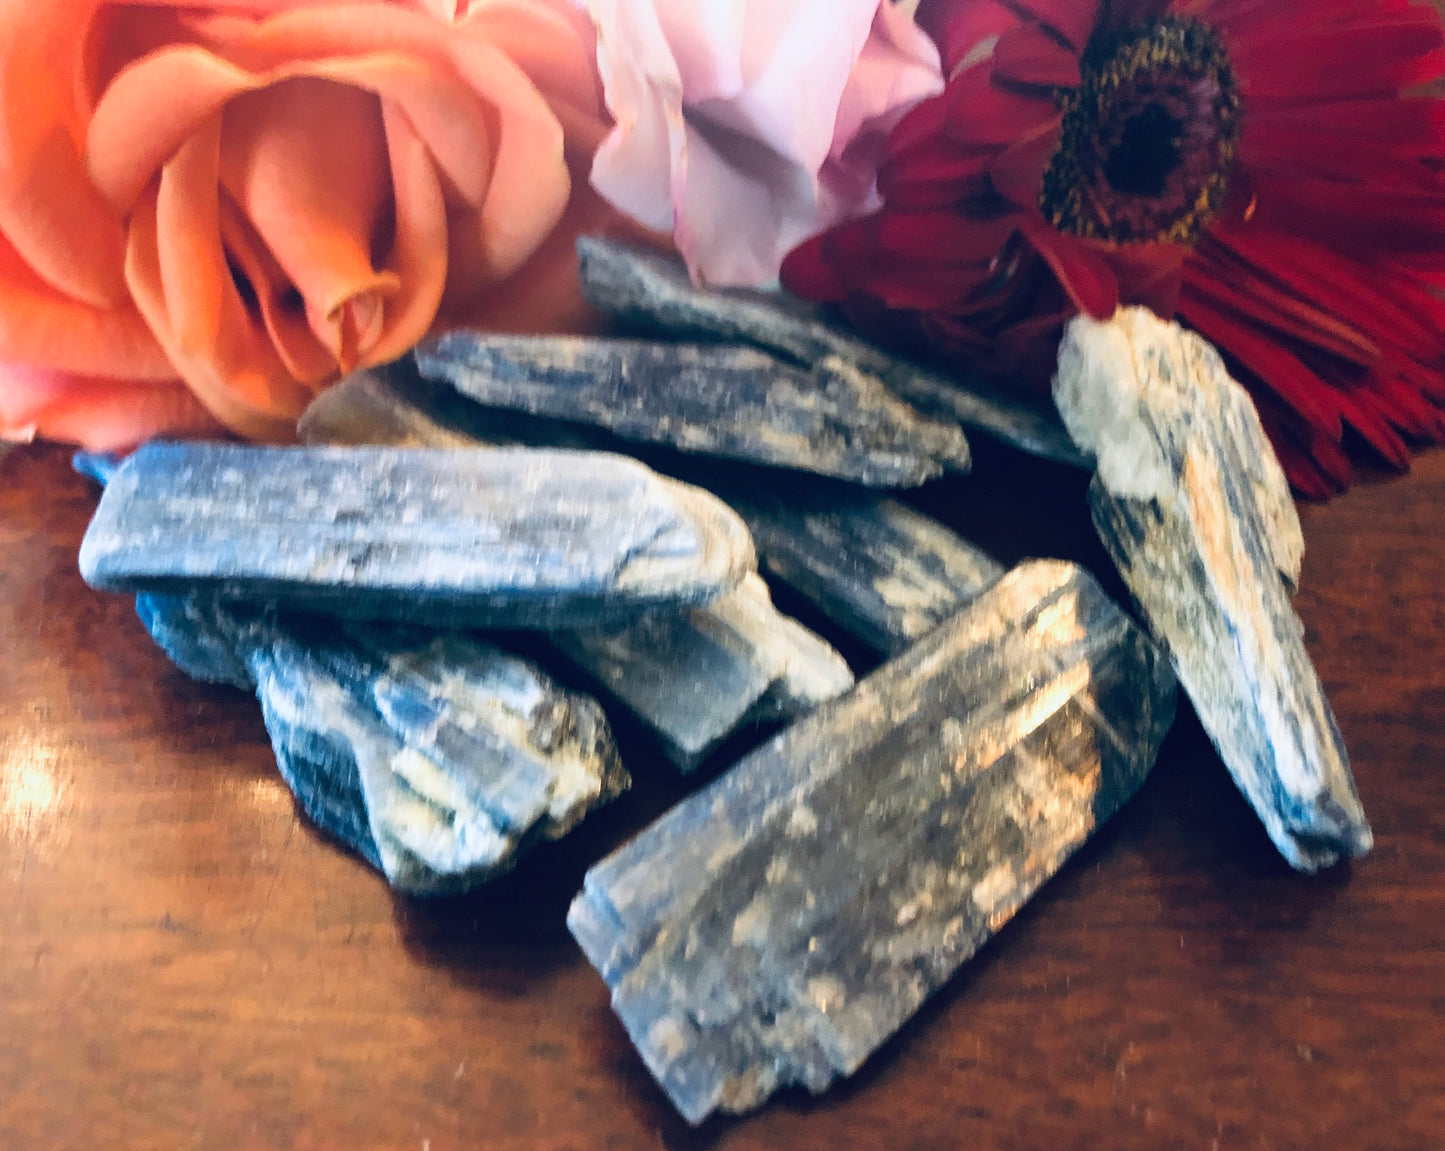 Small and Large Pieces of Blue Kyanite Pieces